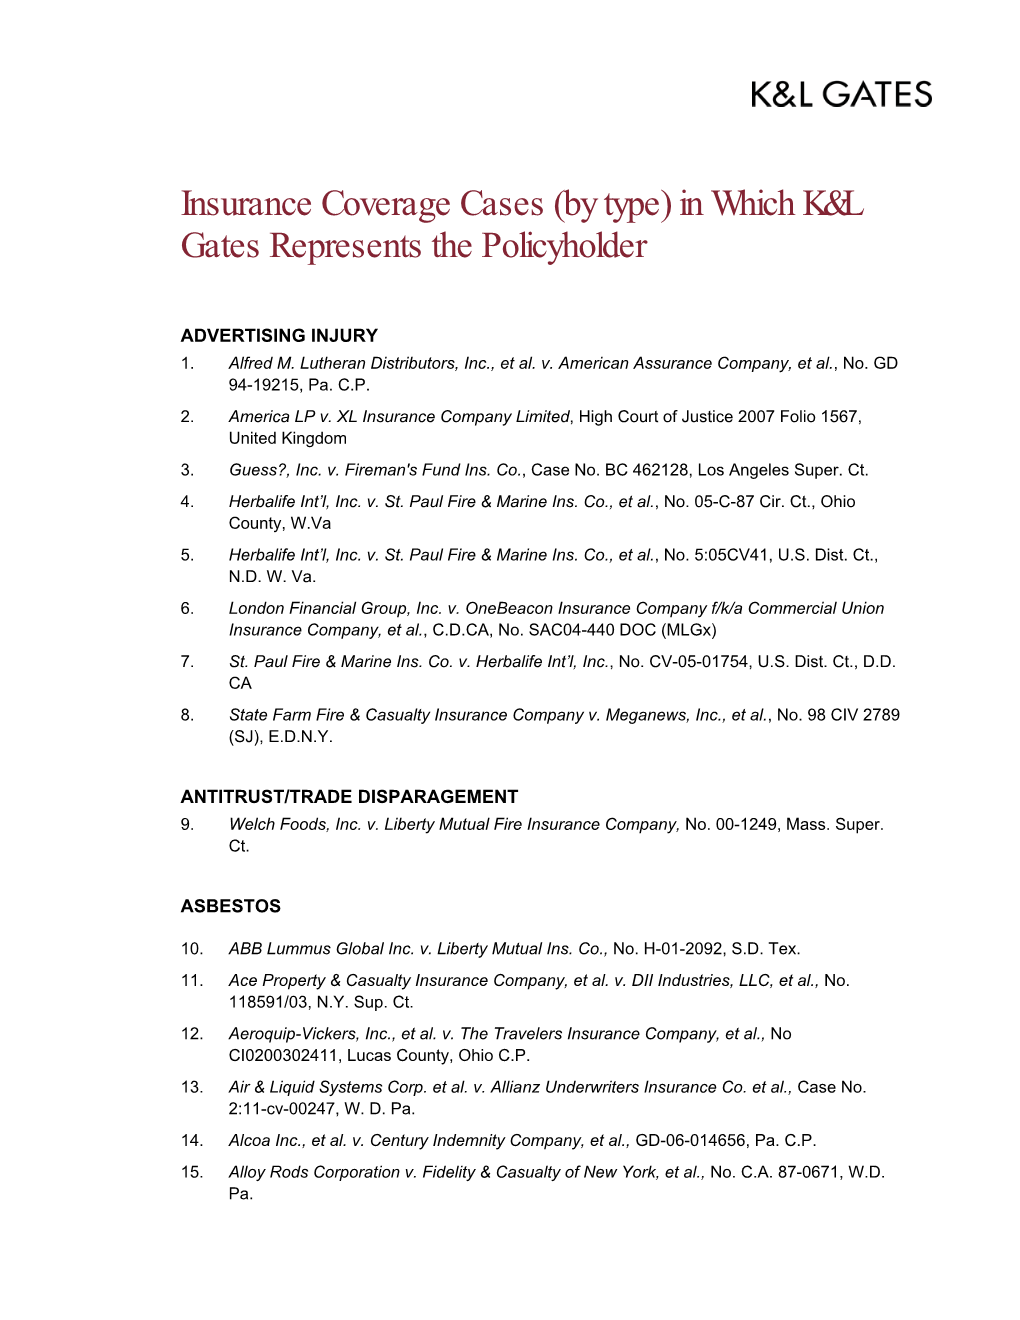 Insurance Coverage Cases (By Type) in Which K&L Gates Represents the Policyholder